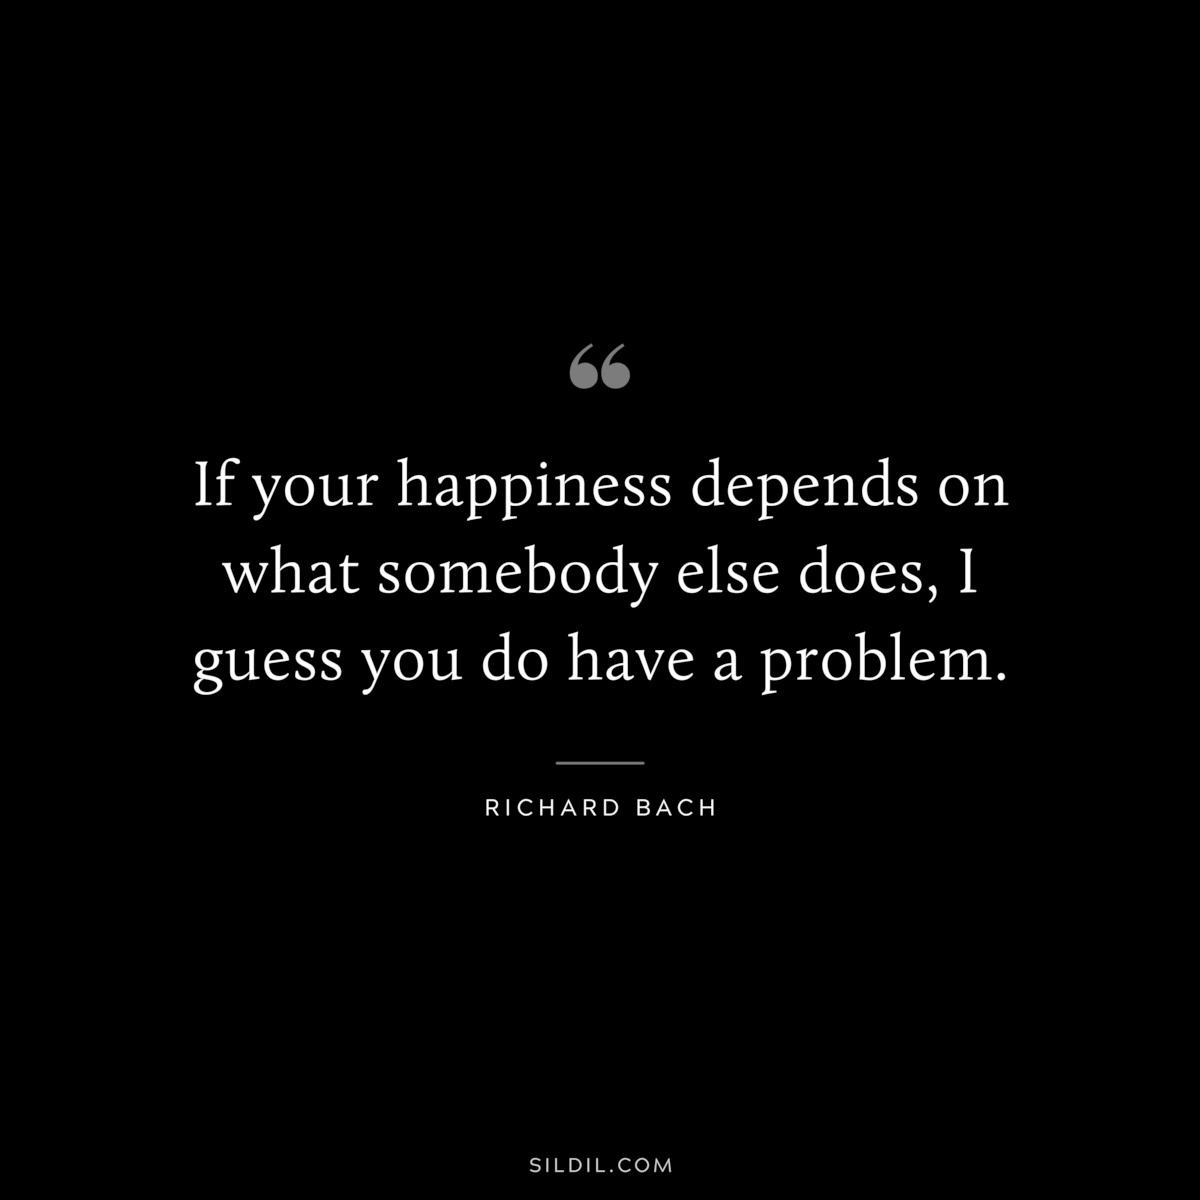 If your happiness depends on what somebody else does, I guess you do have a problem. ― Richard Bach